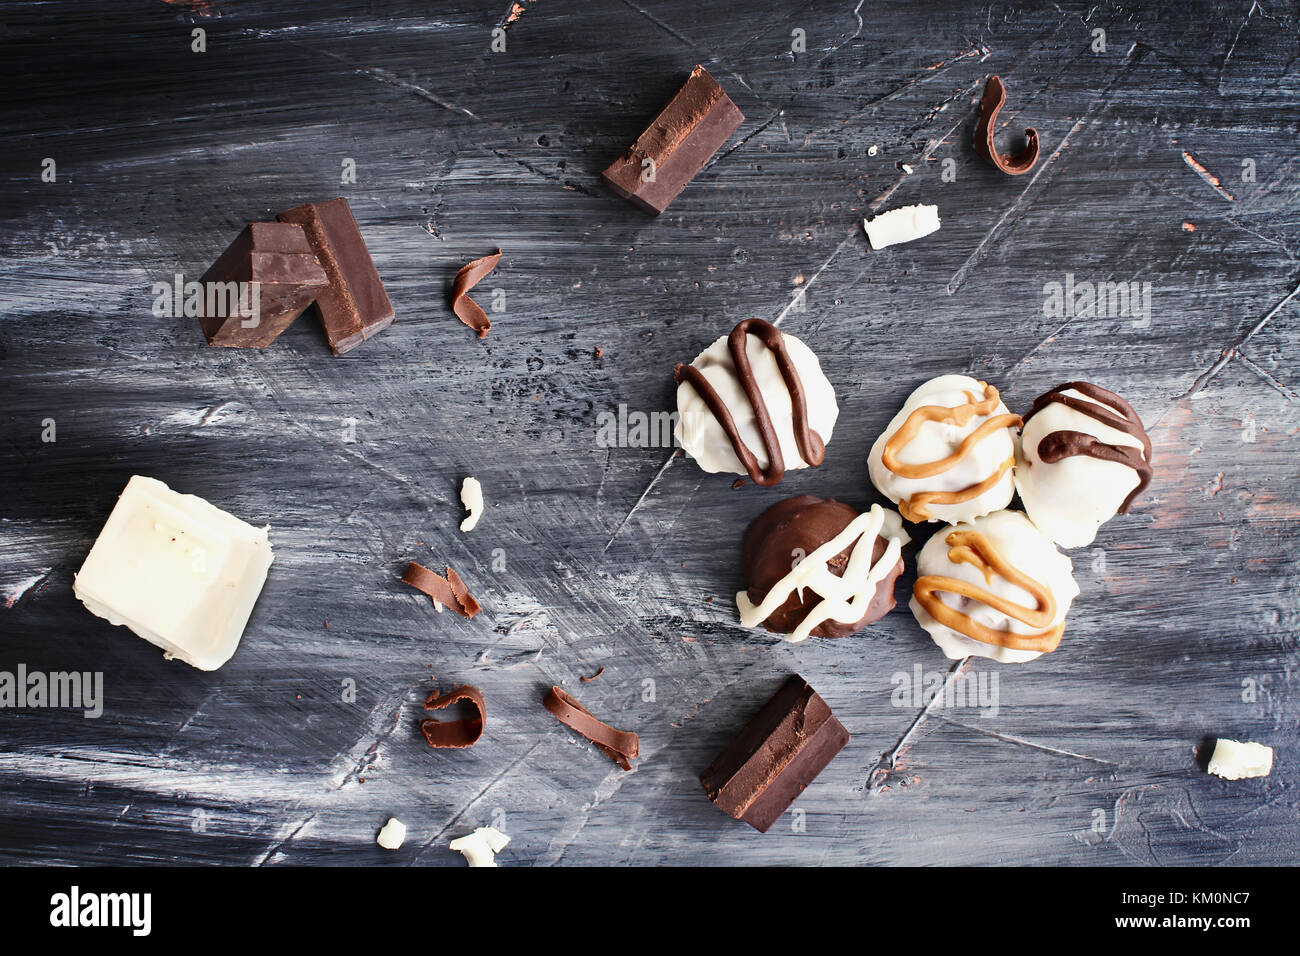 White and Dark Chocolate truffles for Christmas or Valentines's Day with chocolate bark and shavings around them. Stock Photo